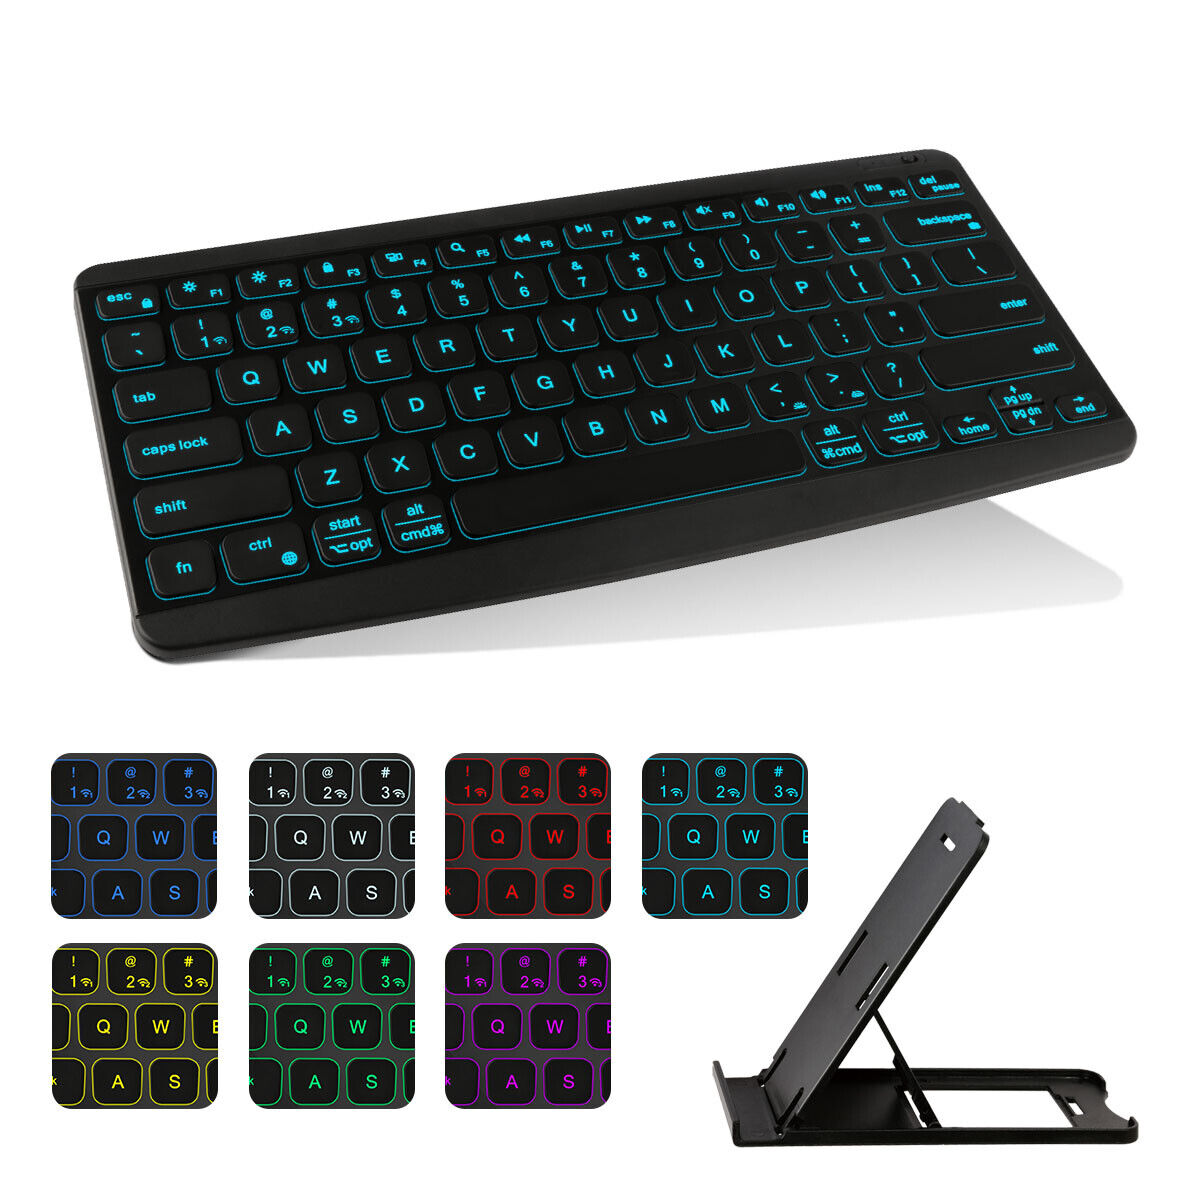 Backlit Wireless Bluetooth Keyboard iOS Android Windows PC iPad Tablet & Stand